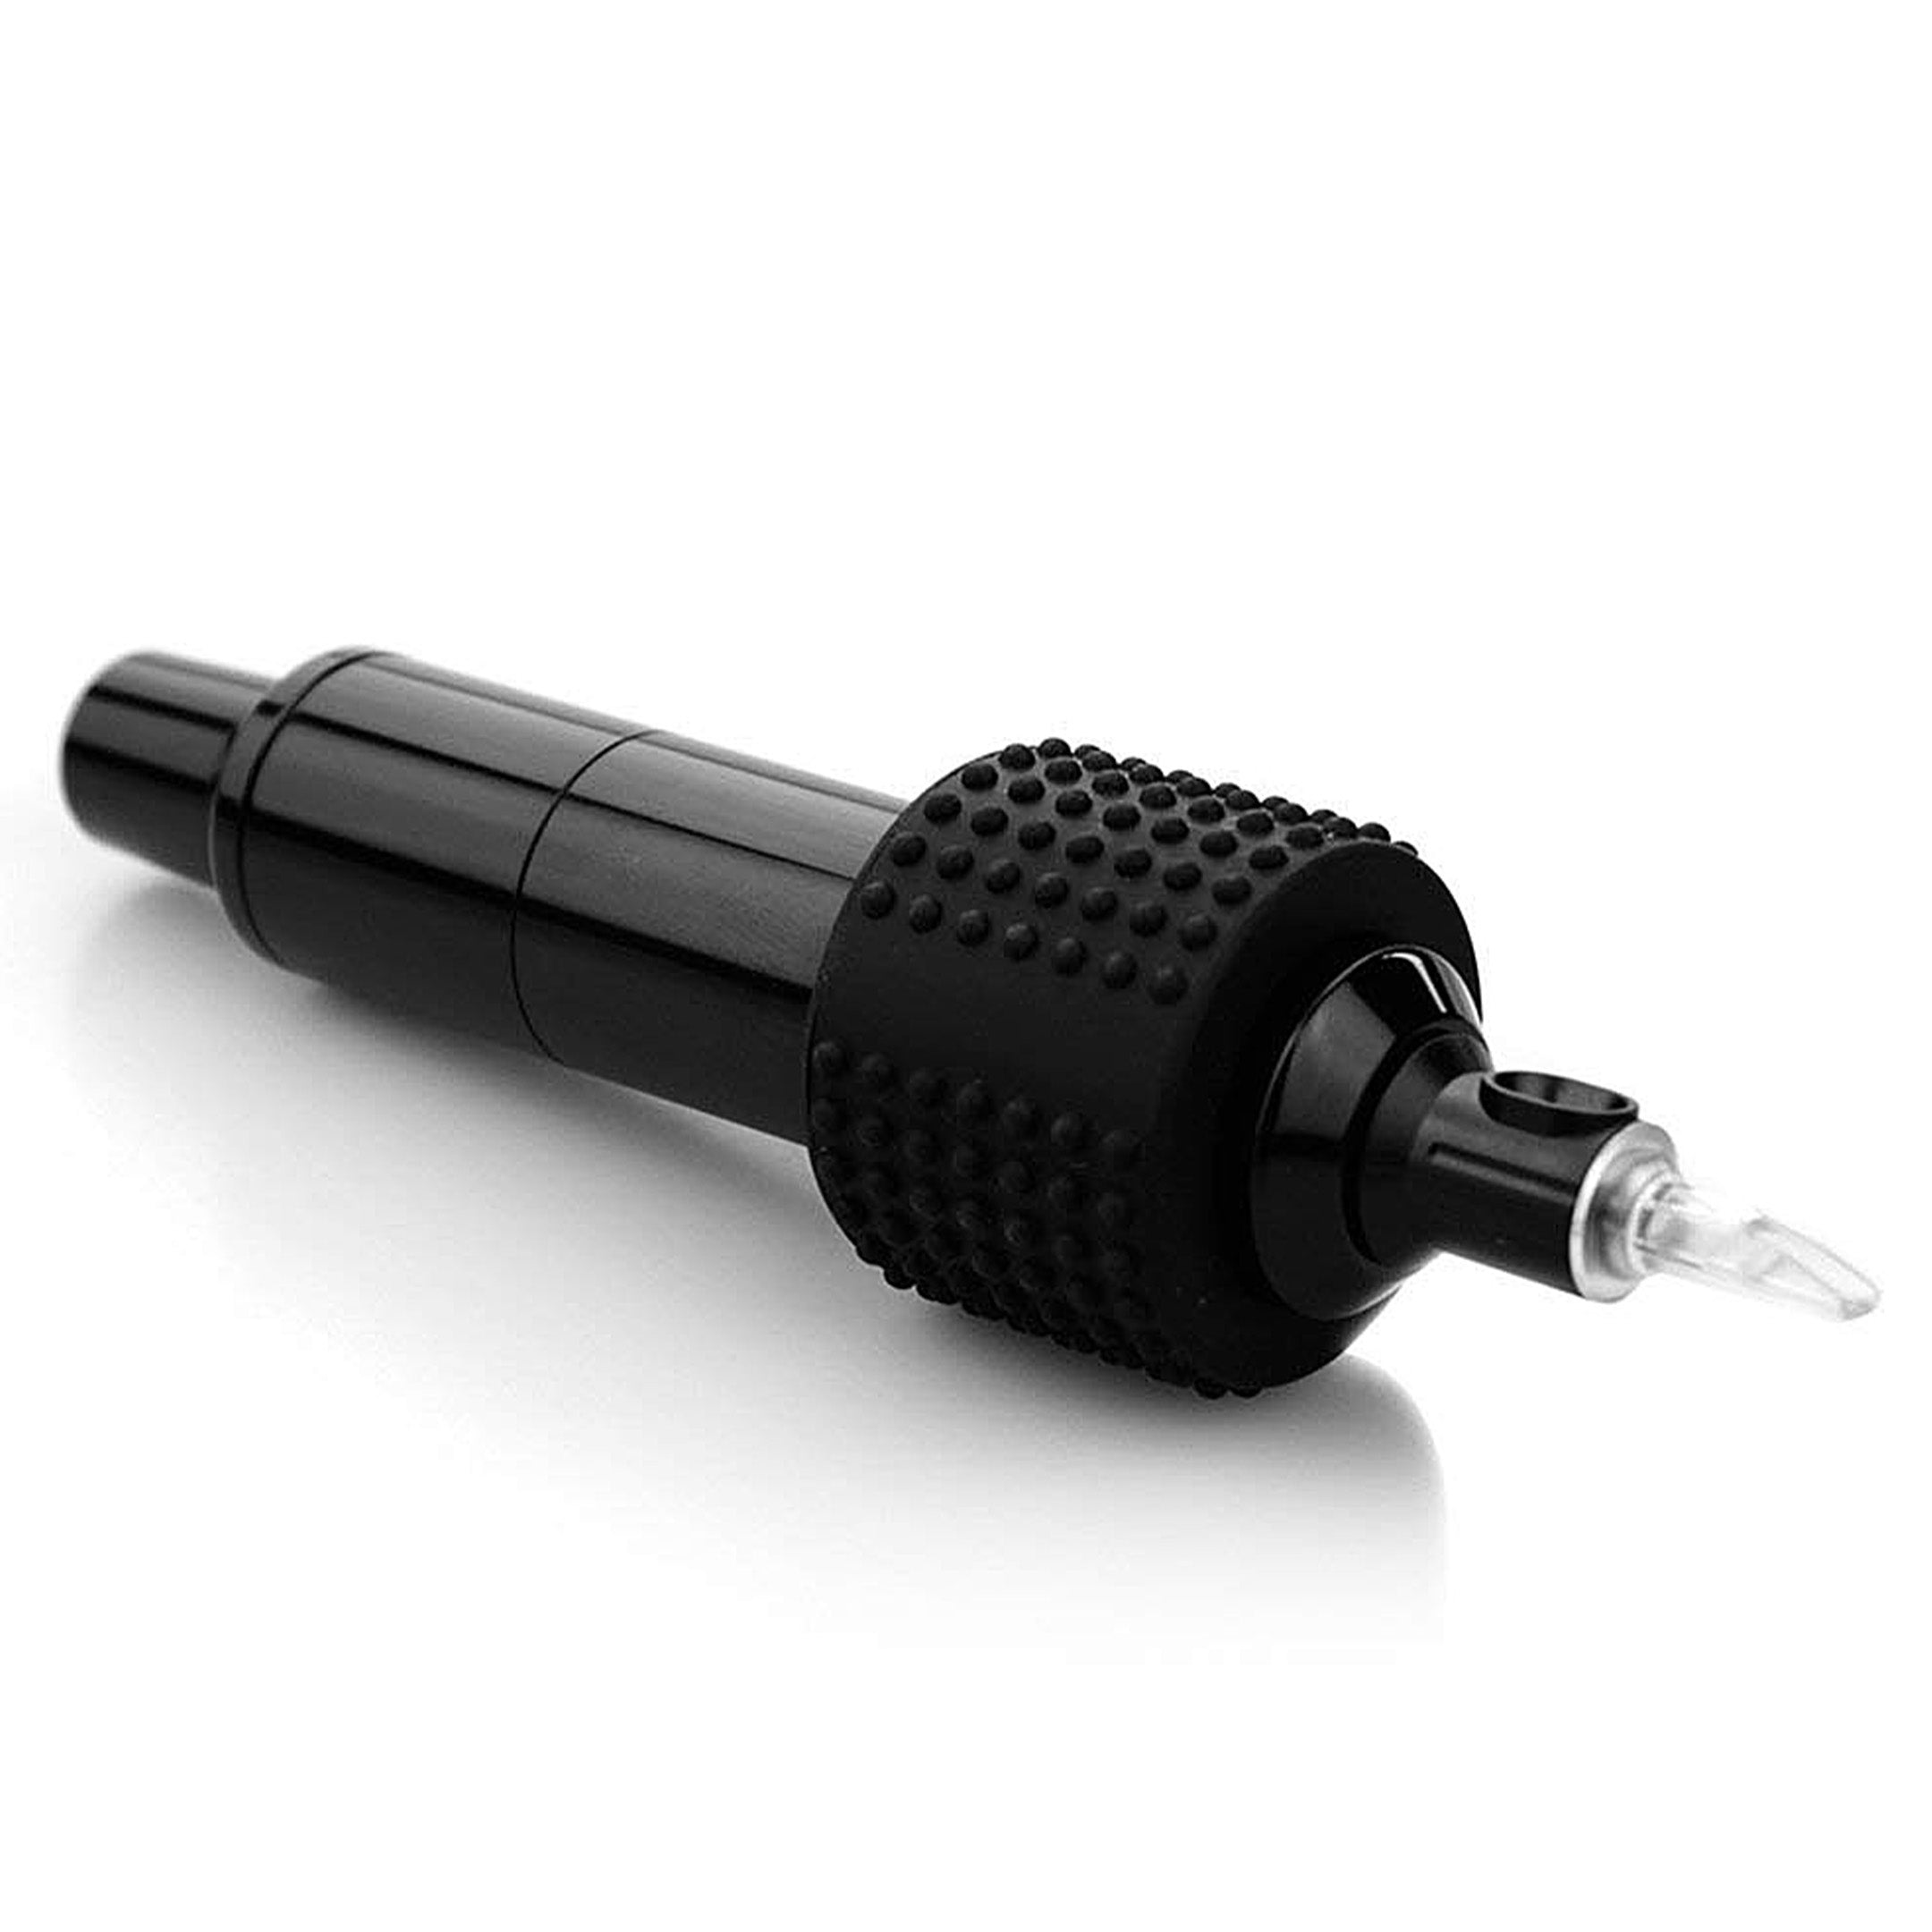 Tattoo Pen Silicone Grip - 25mm